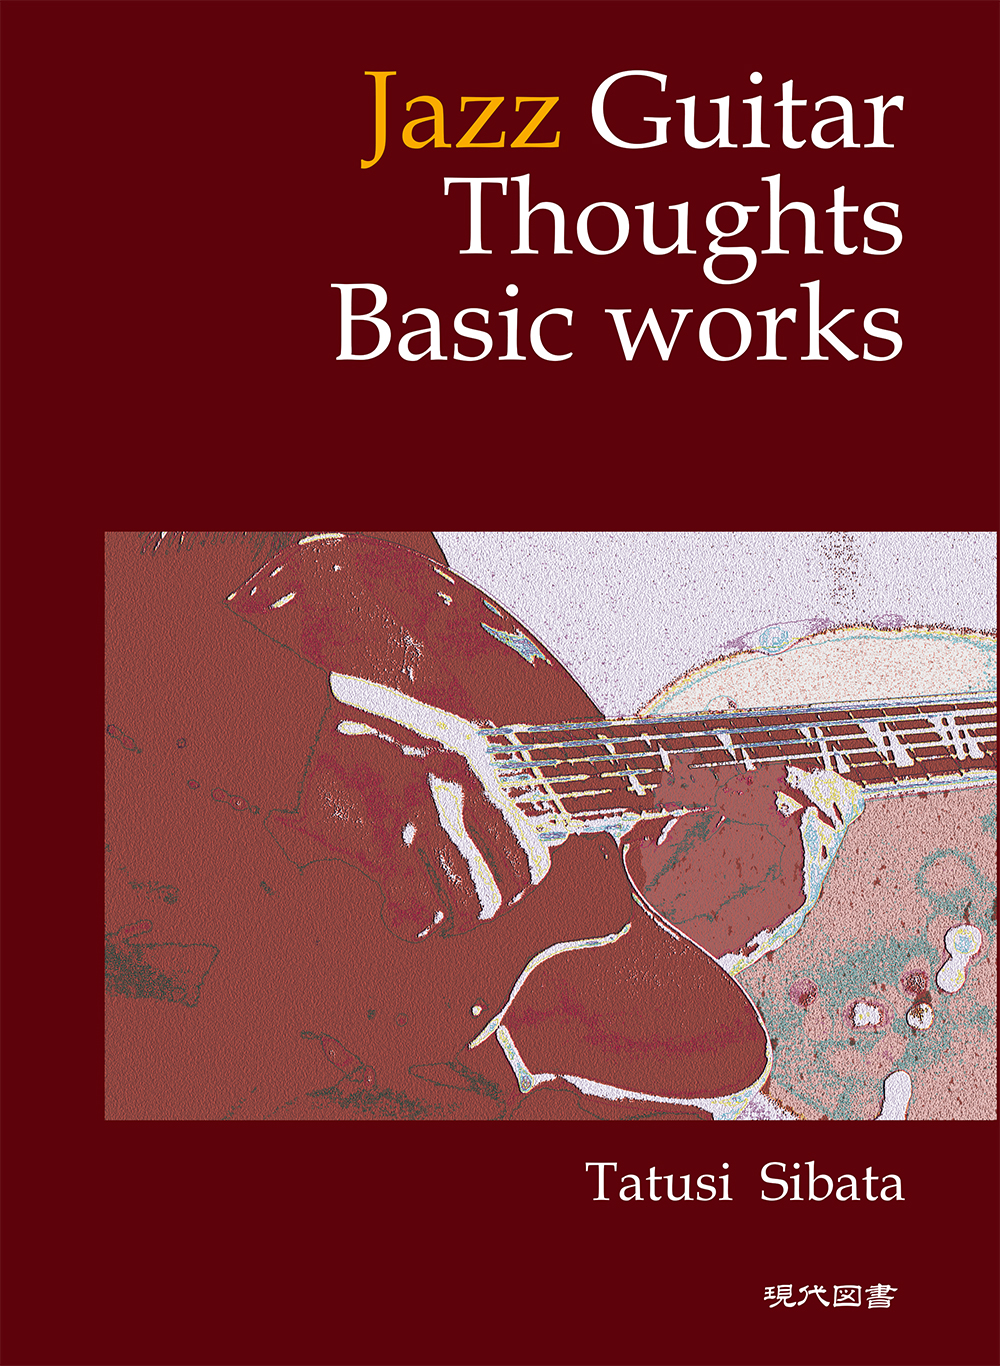 Jazz Guitar Thoughts Basic works